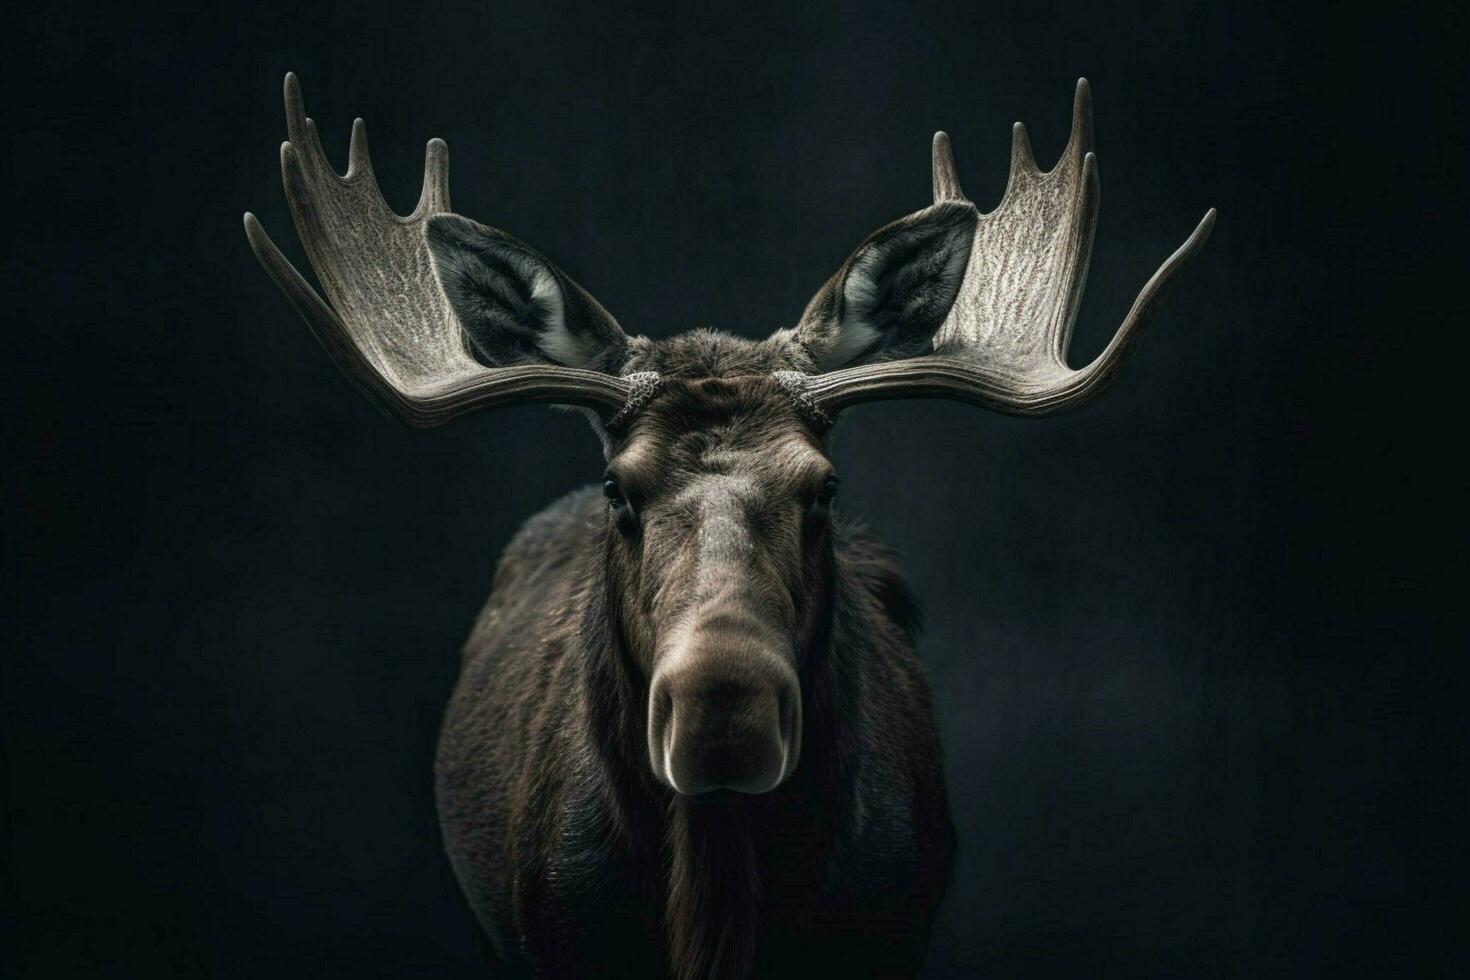 photo of Moose with no background